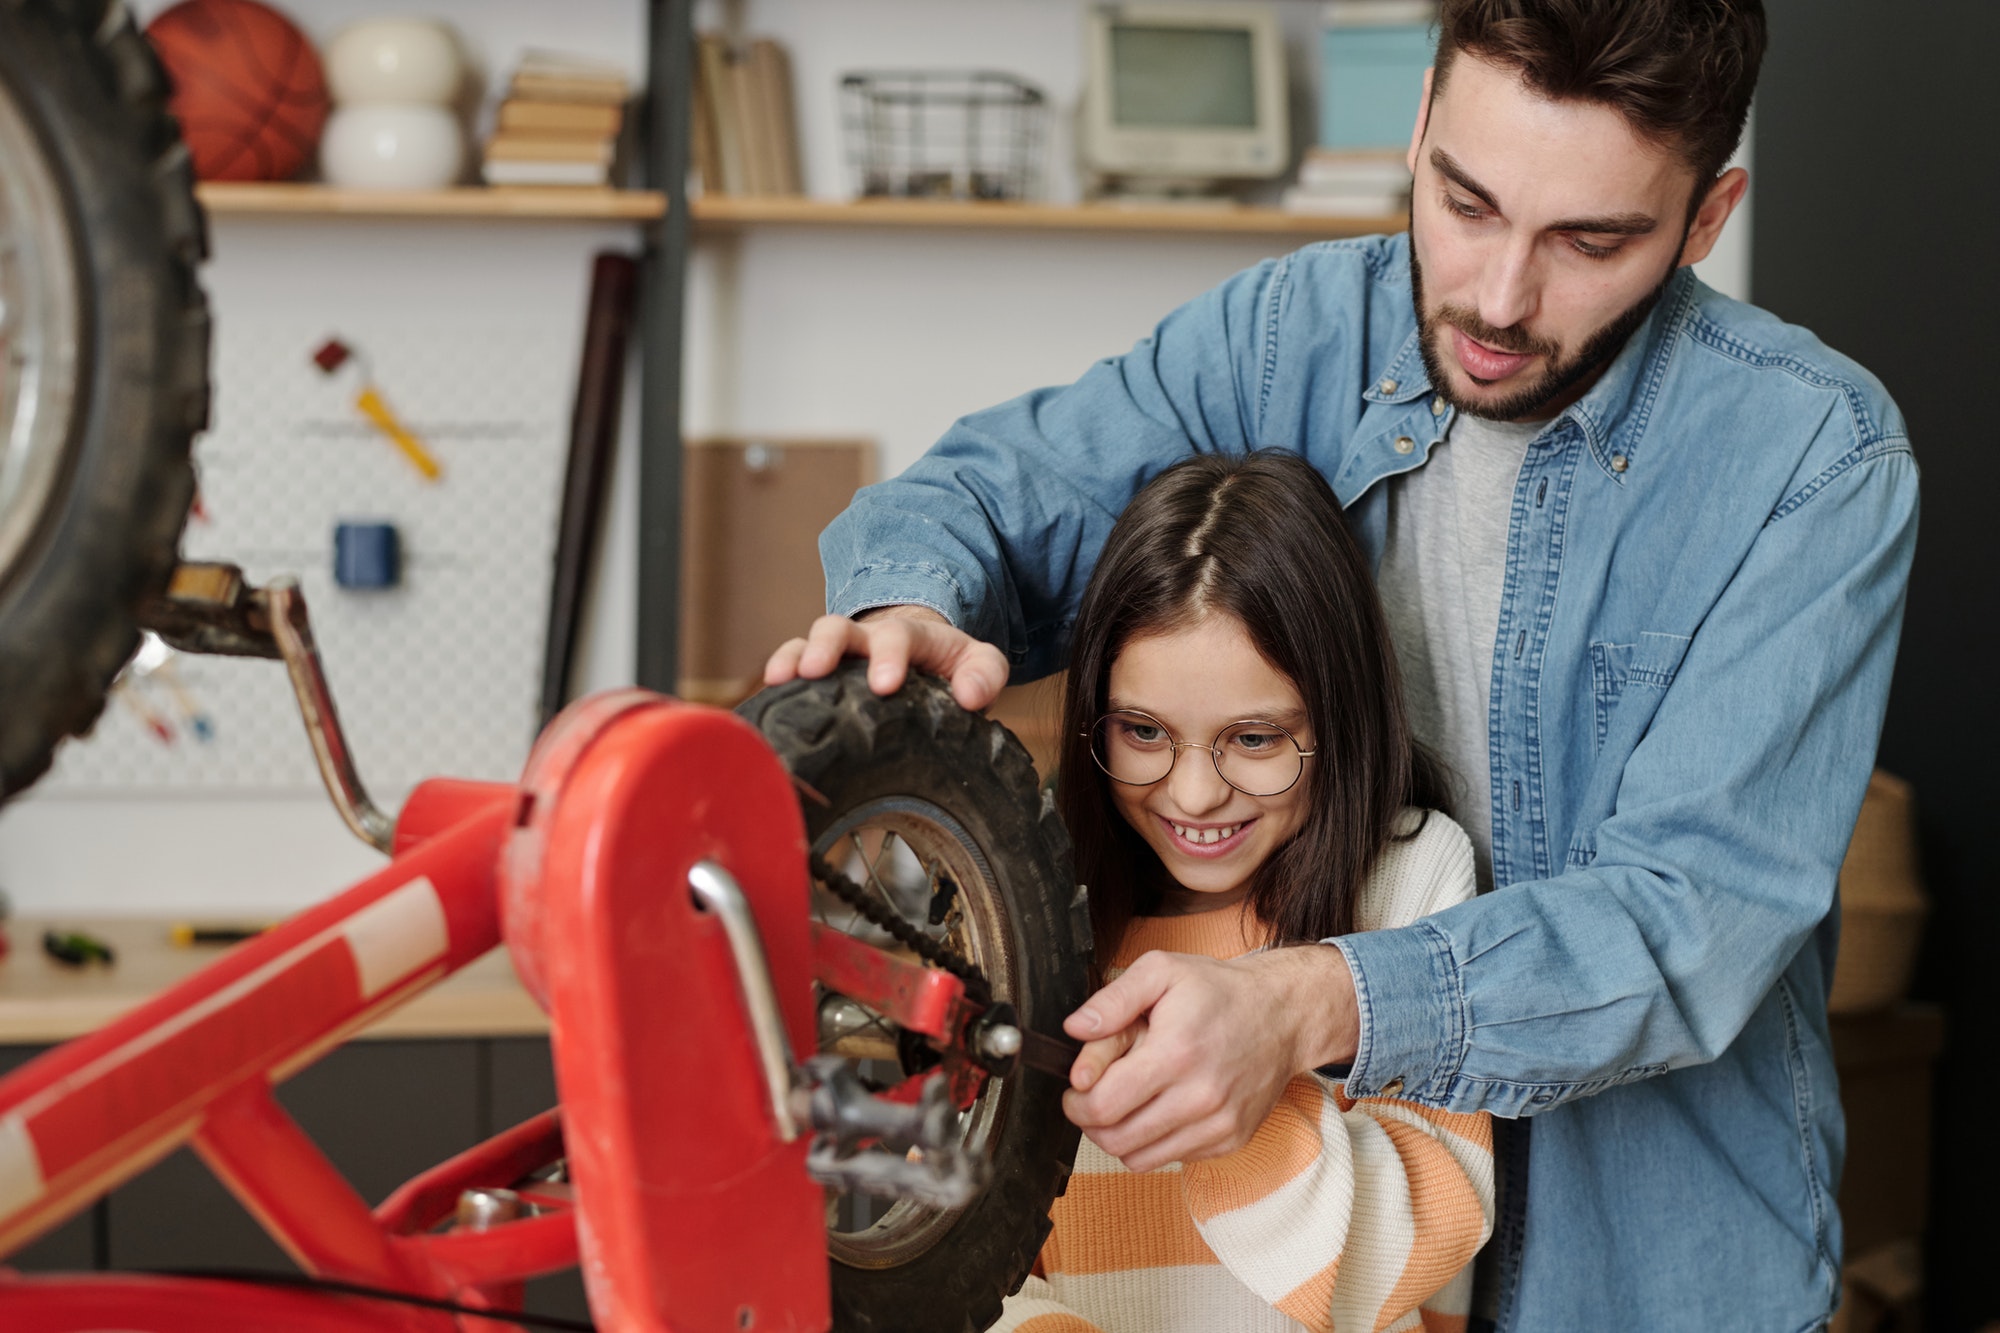 Smiling girl helping father repair her bicycle while holding part of wheel